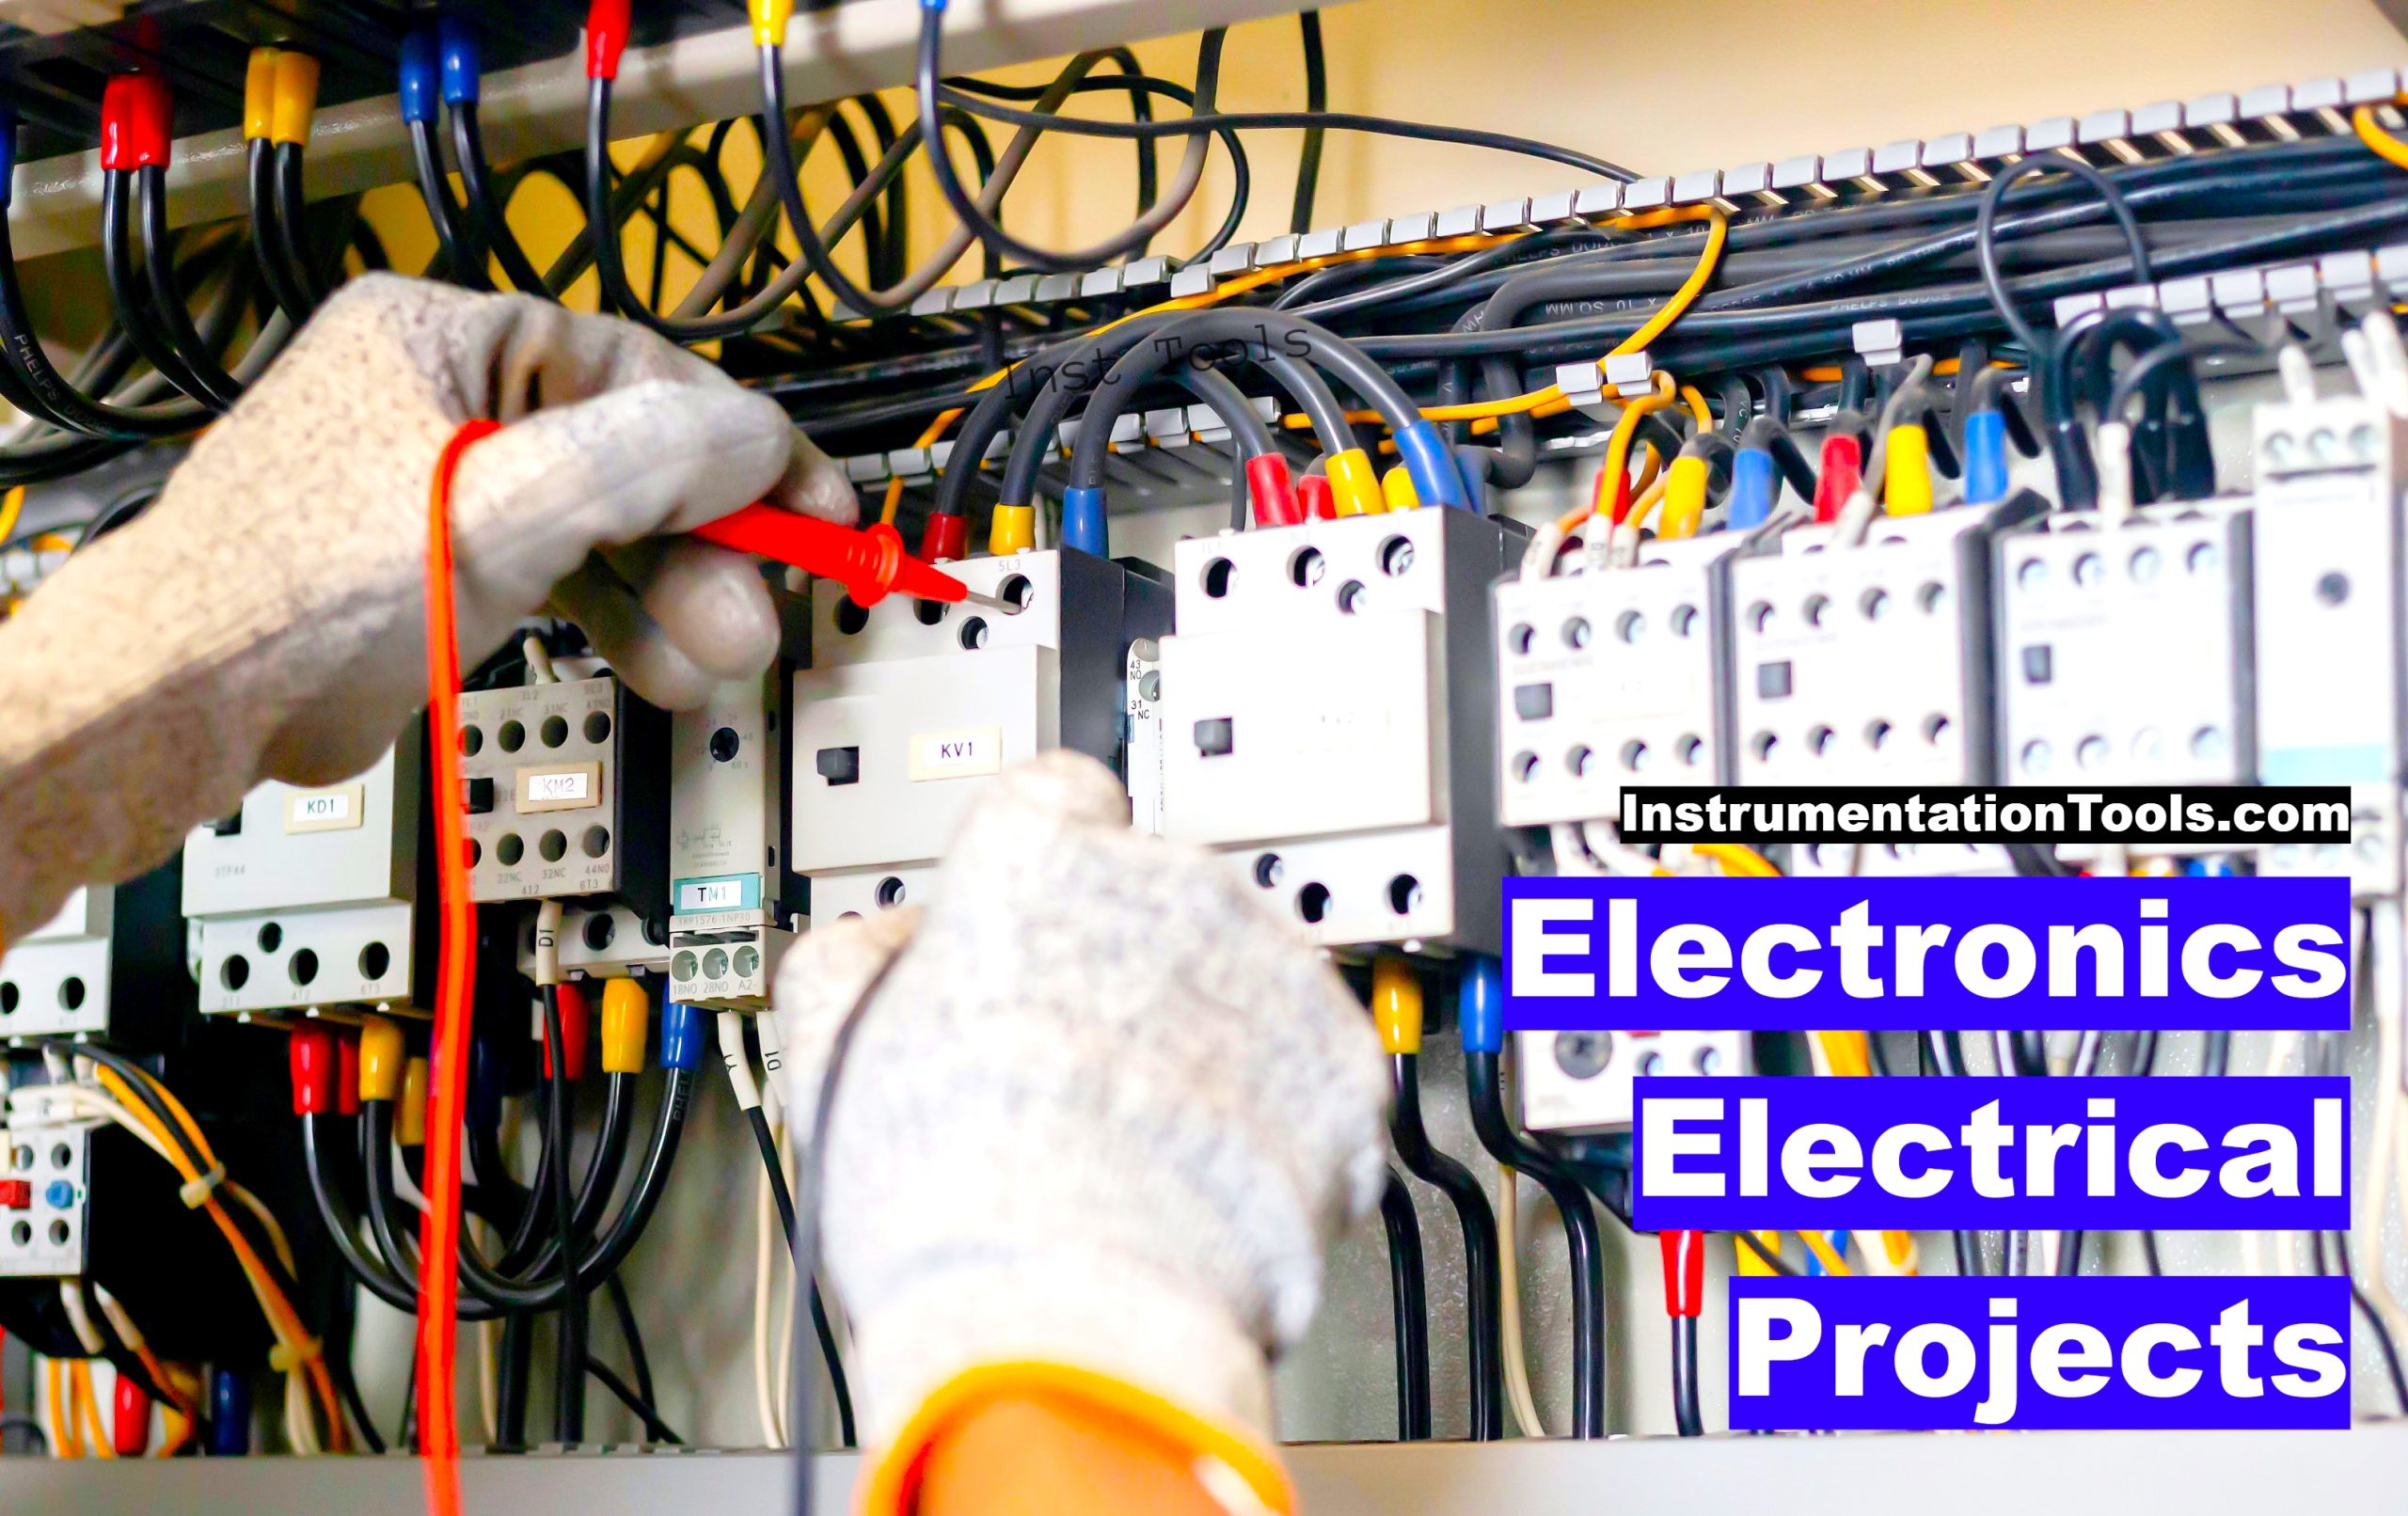 100 Electronics and Electrical Projects for Engineering Students